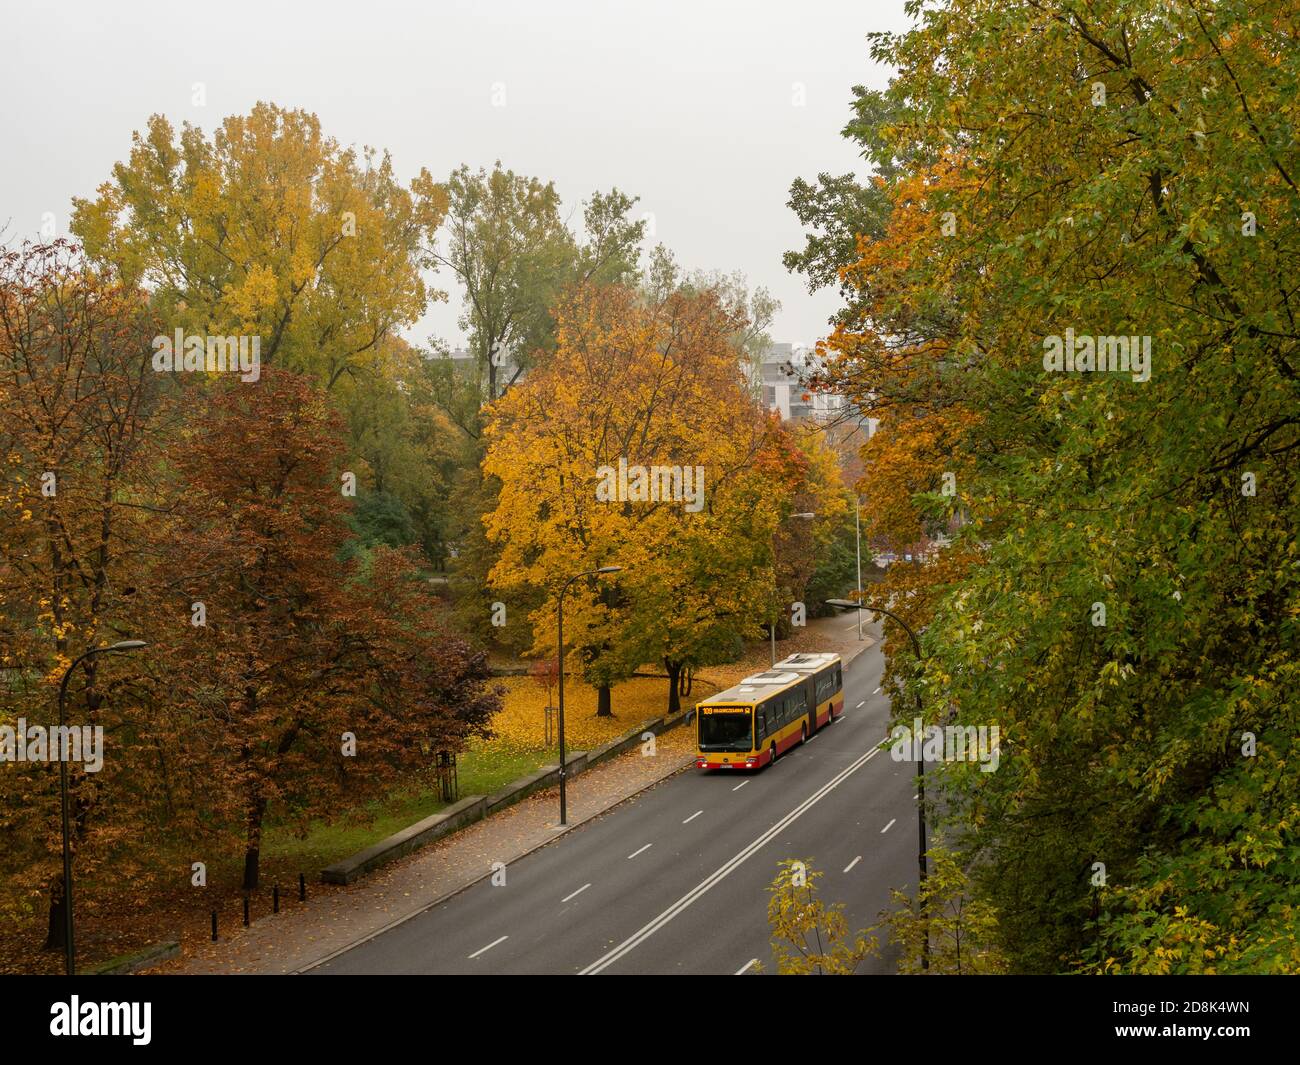 Warsaw/Poland - 25/10/2020 - almost empty street, only public bus i driving down the road. Autumn time. Stock Photo